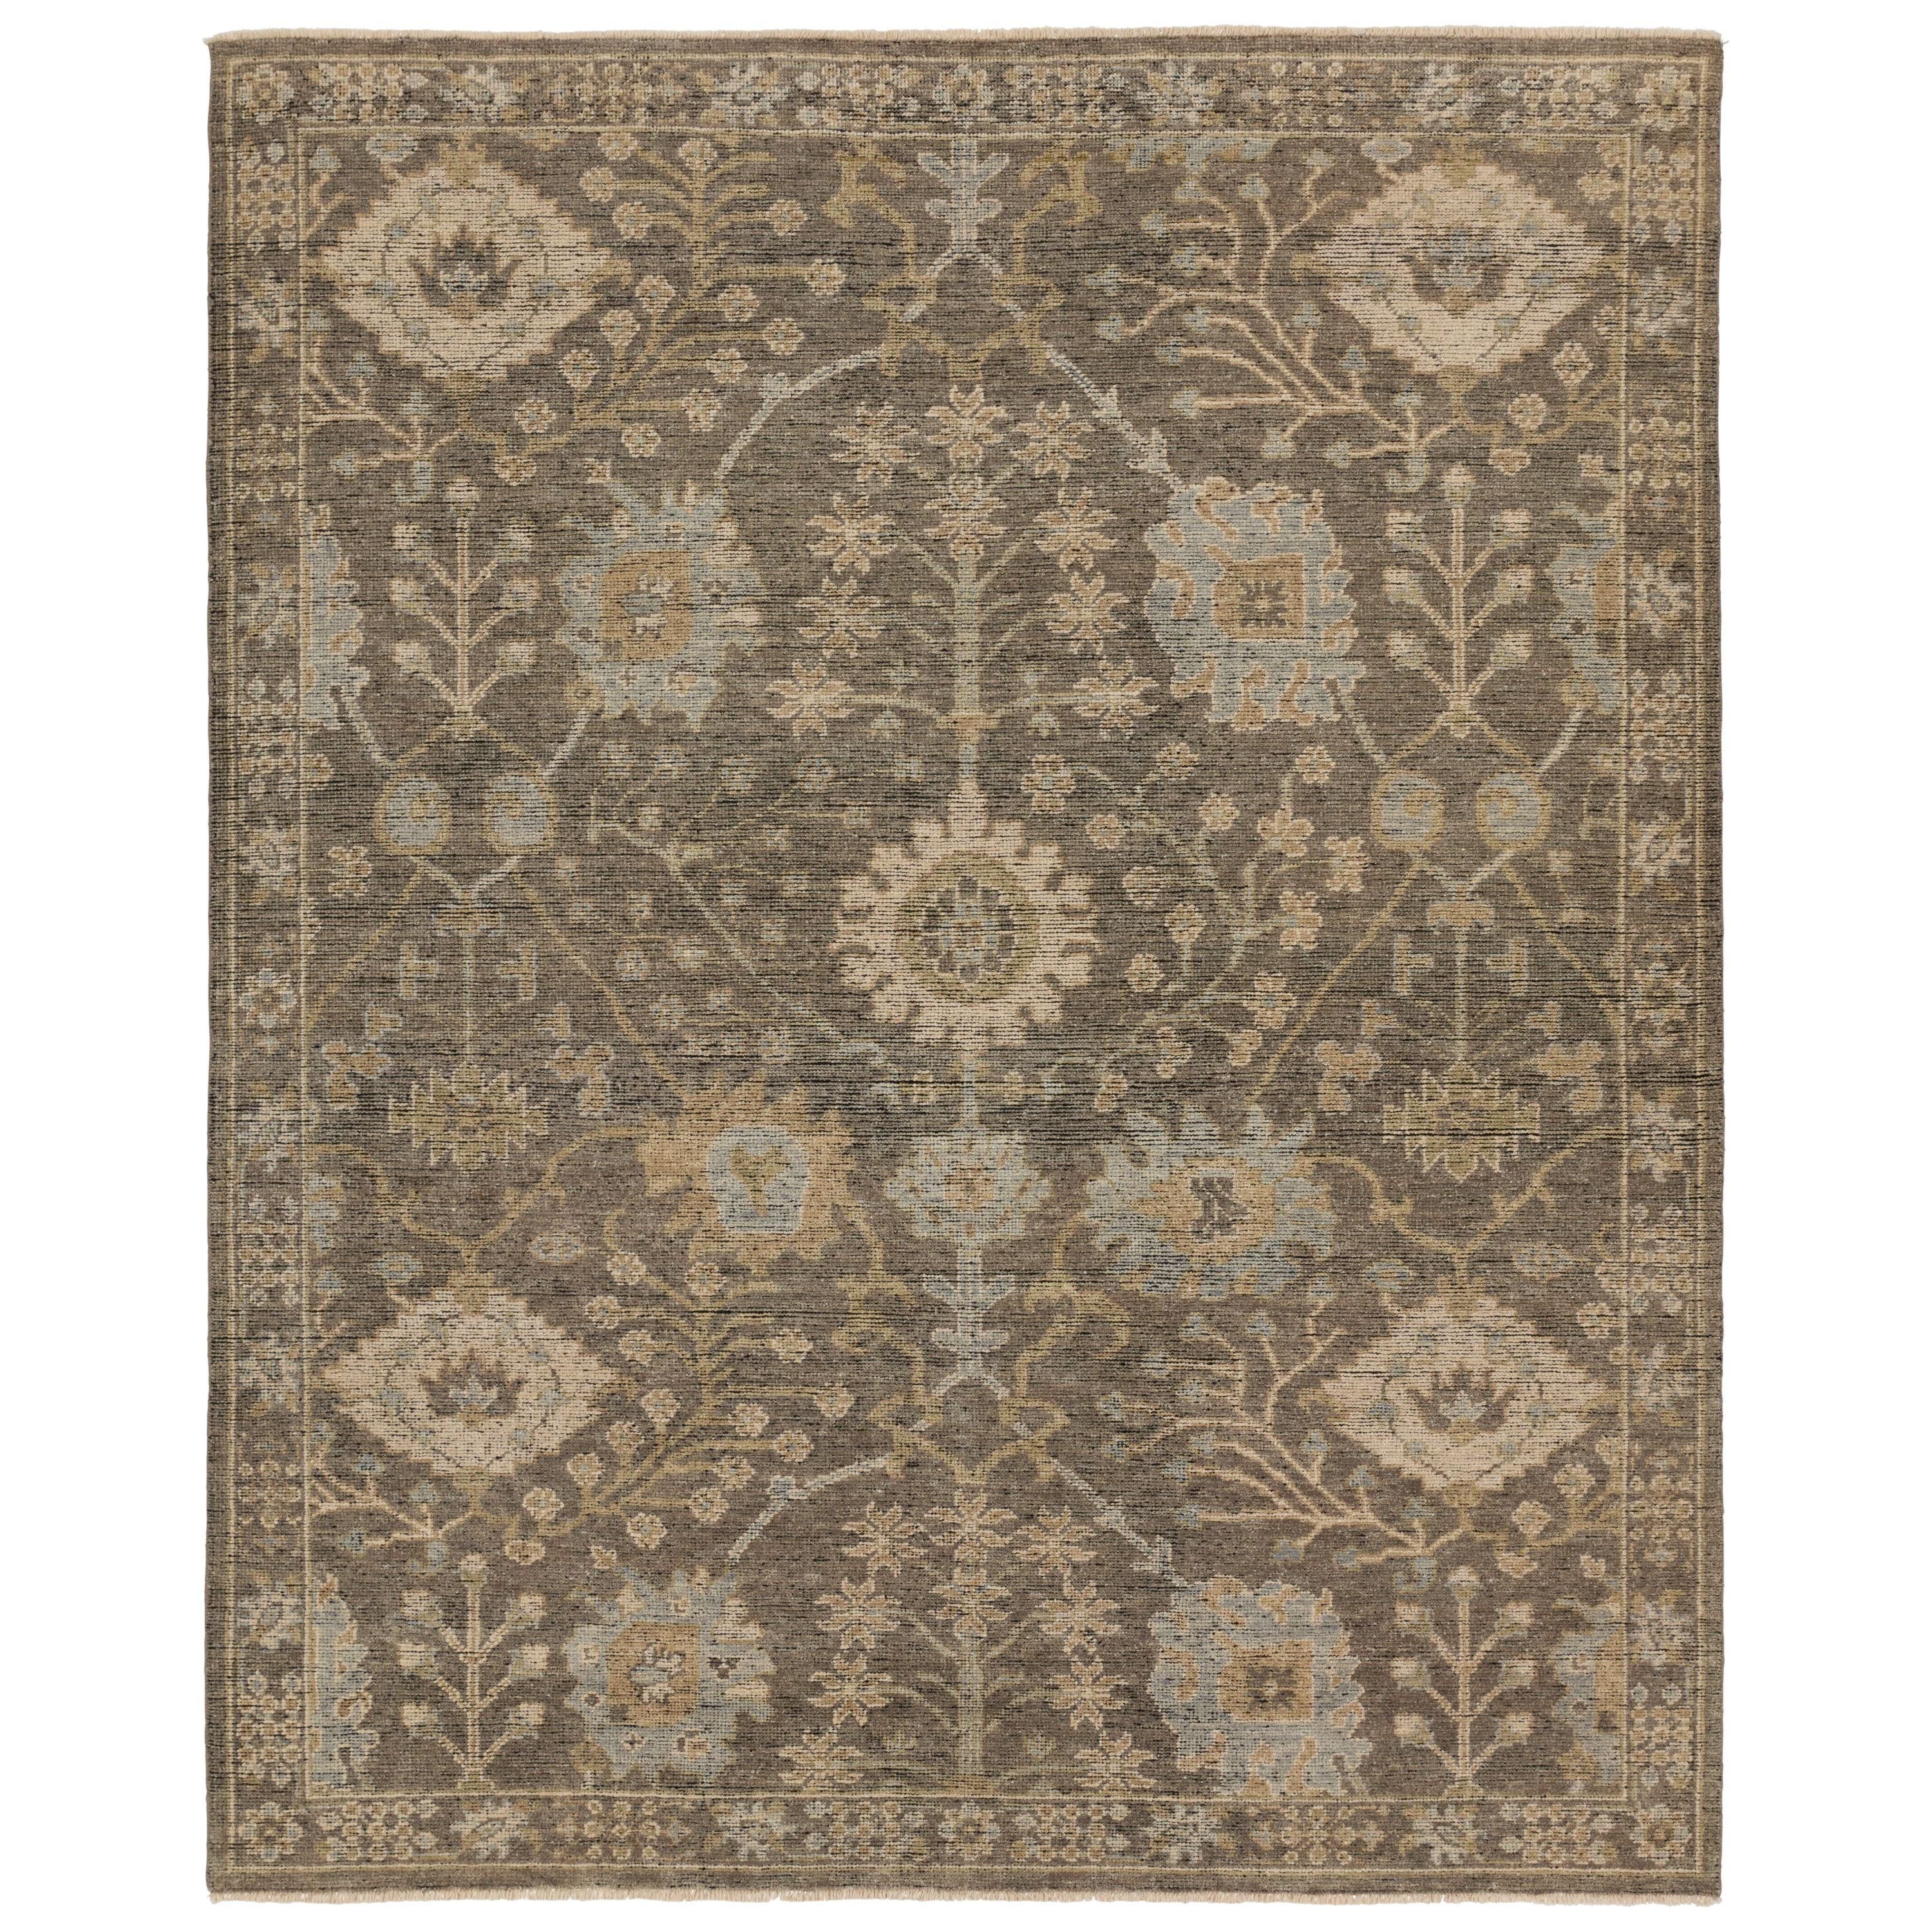 The Rhapsody collection features heirloom-quality designs of stunningly abrashed Old World patterns. The Maeli area rug boasts a beautifully washed Oushak motif with a decorative border. The gray tones are accented with cream, black, brown, and green hues for added depth and intrigue. This durable wool handknot anchors living spaces with a fresh take on vintage style. Amethyst Home provides interior design, new construction, custom furniture, and area rugs in the Nashville metro area.